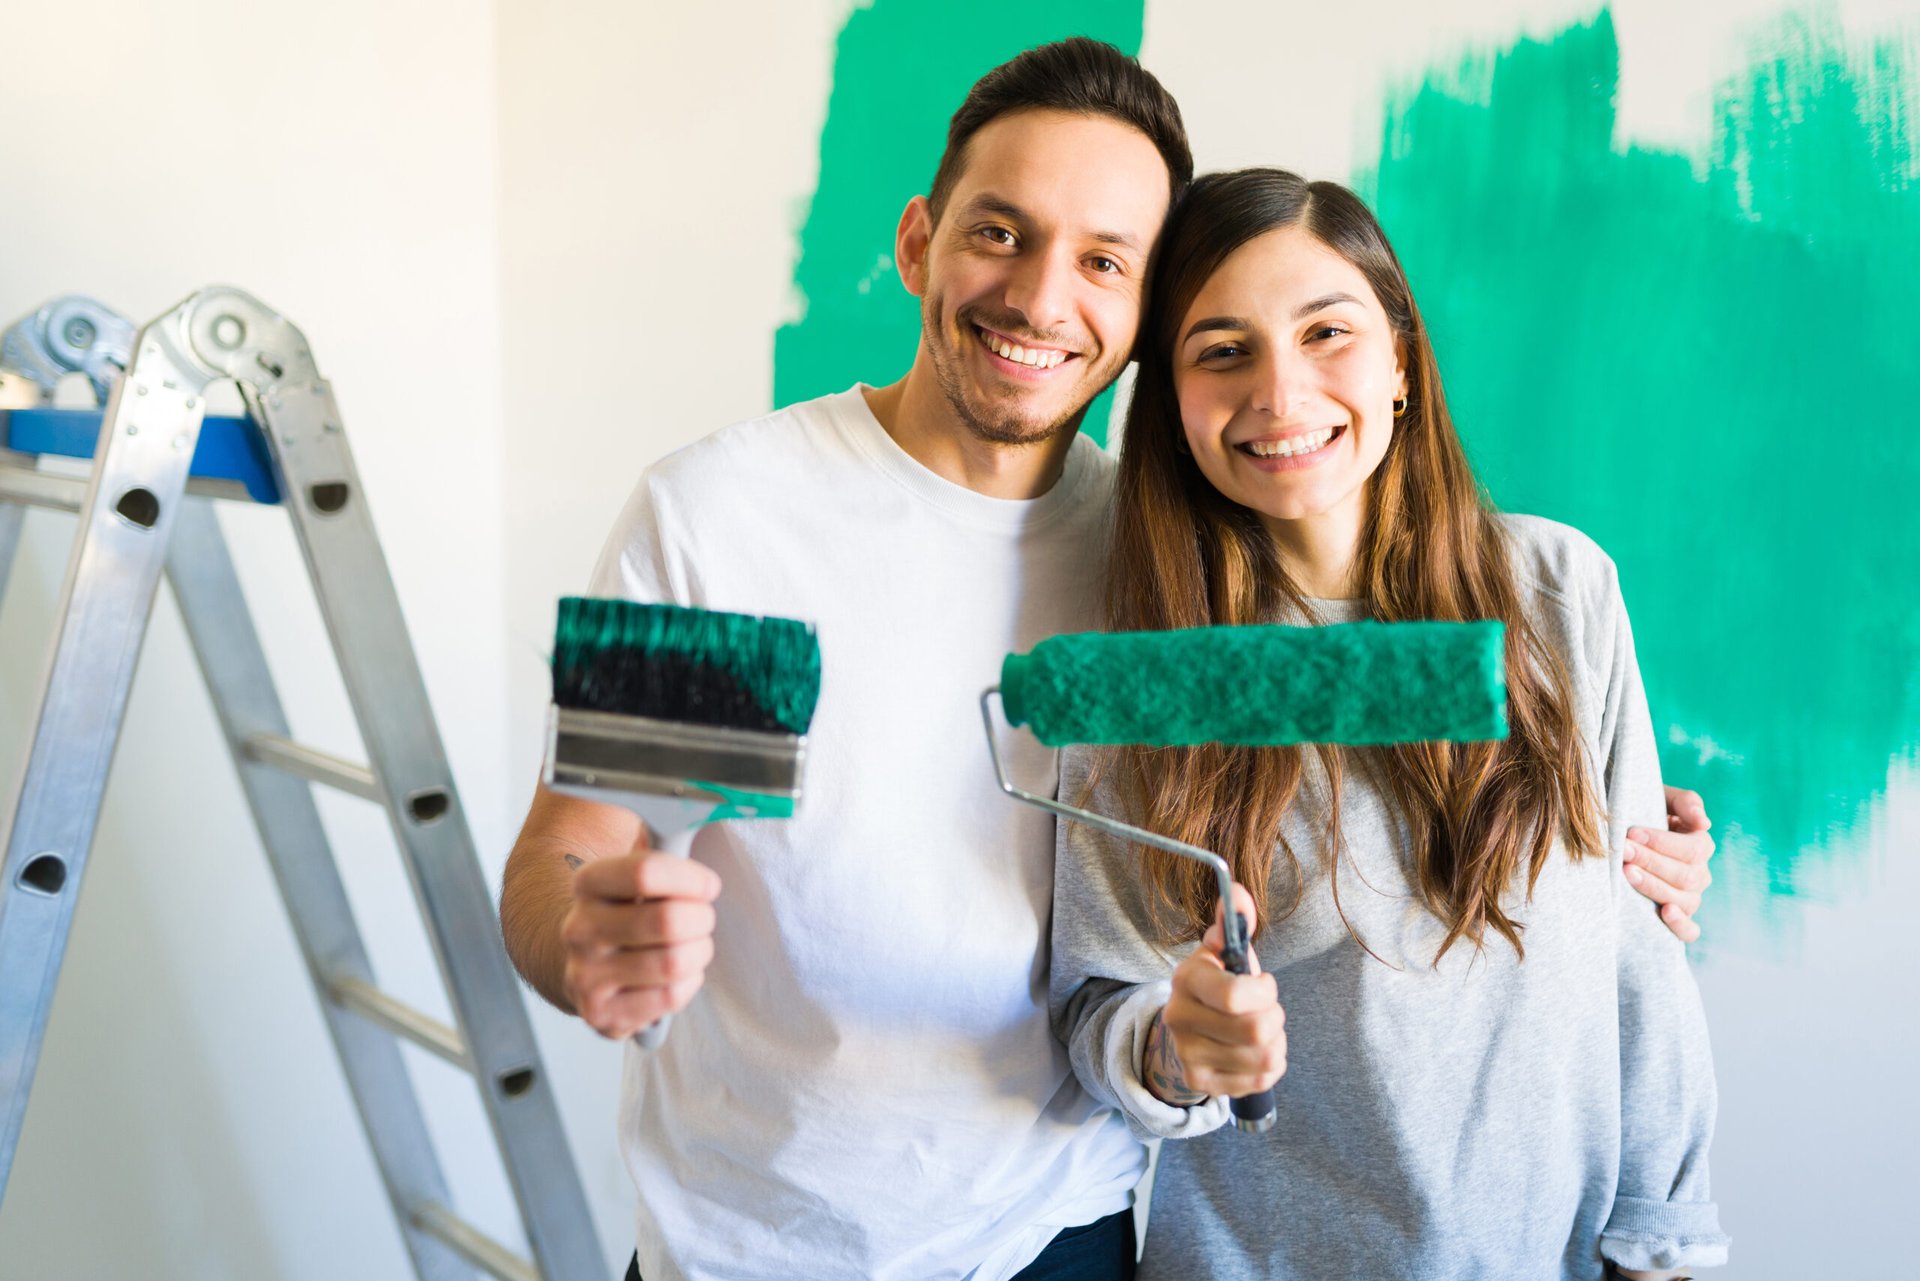 Couple painting their home